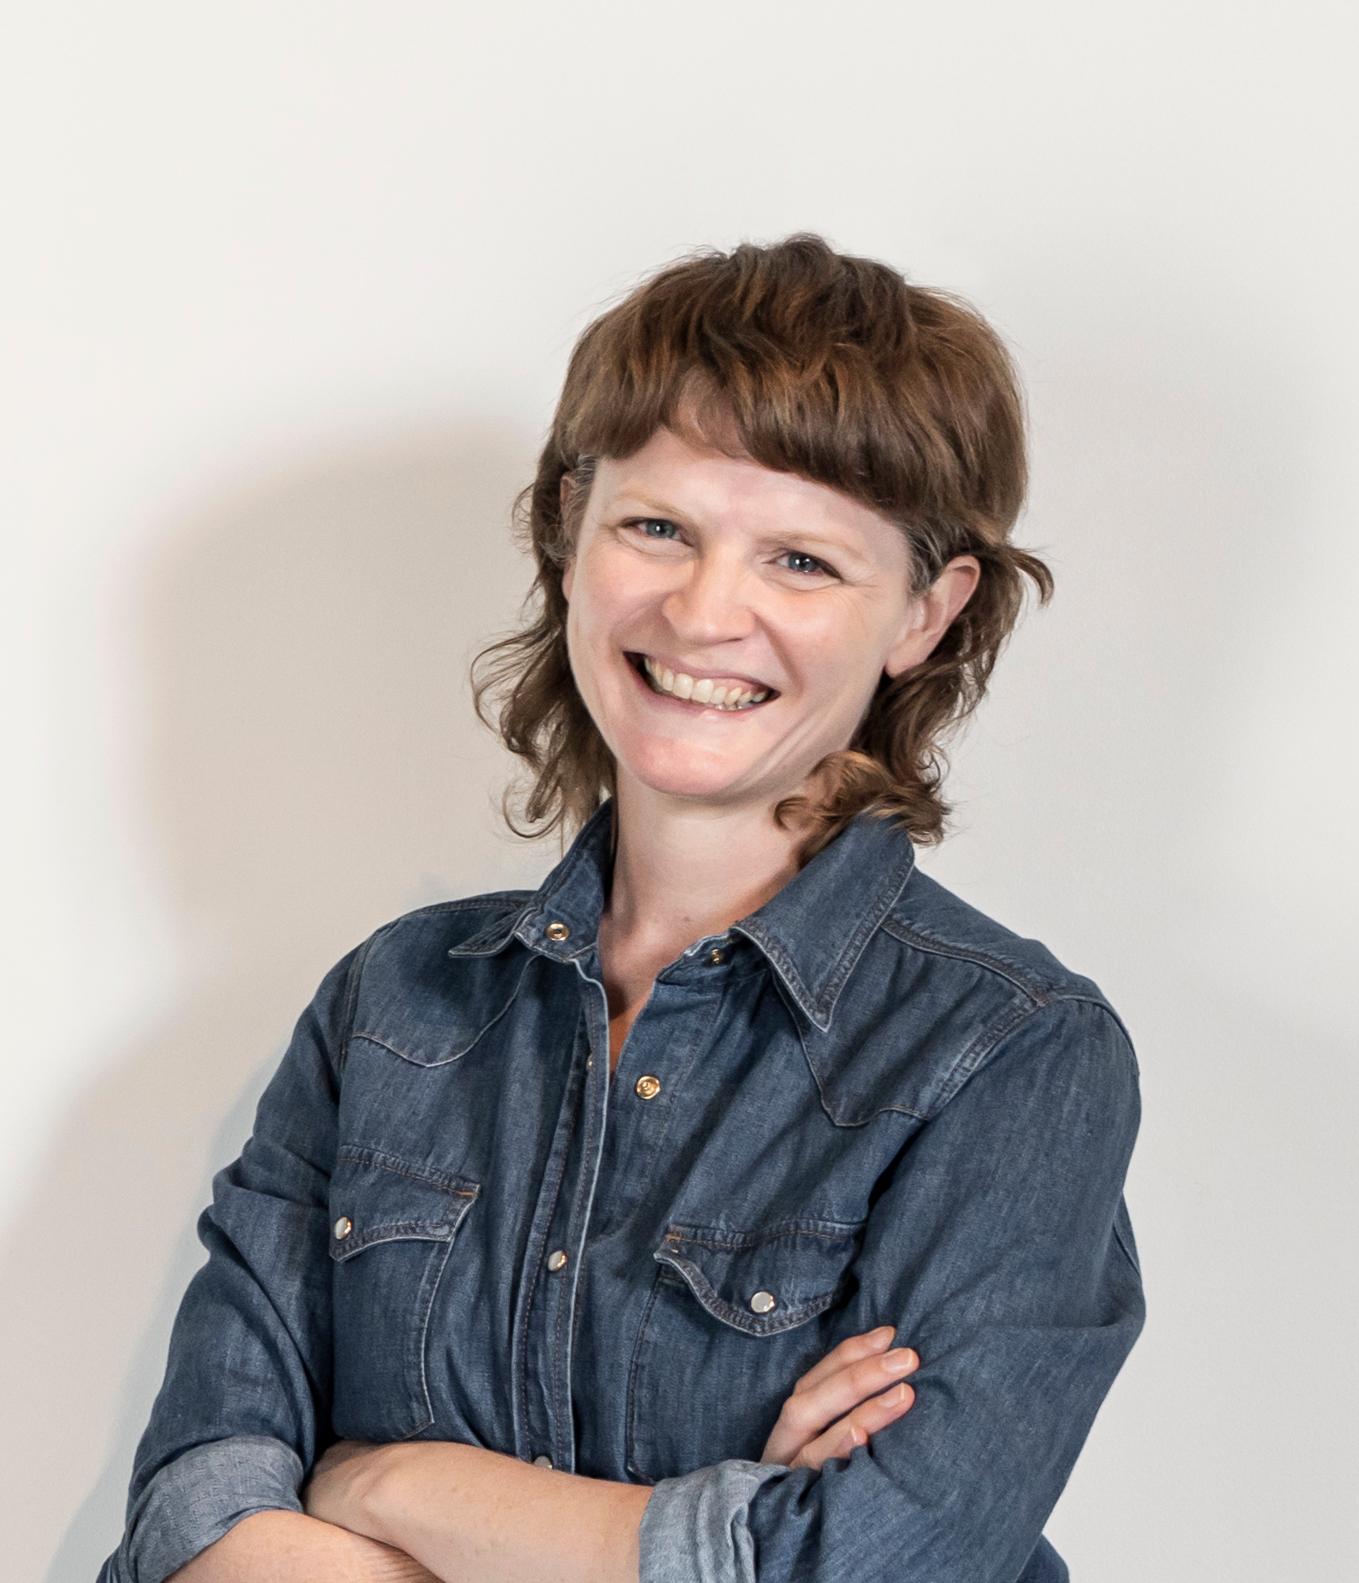 Headshot of visual artist Caitlin Franzmann. Caitlin is wearing a denim jacket with arms folded and smiling broadly at the camera. She stands in front of a white background.